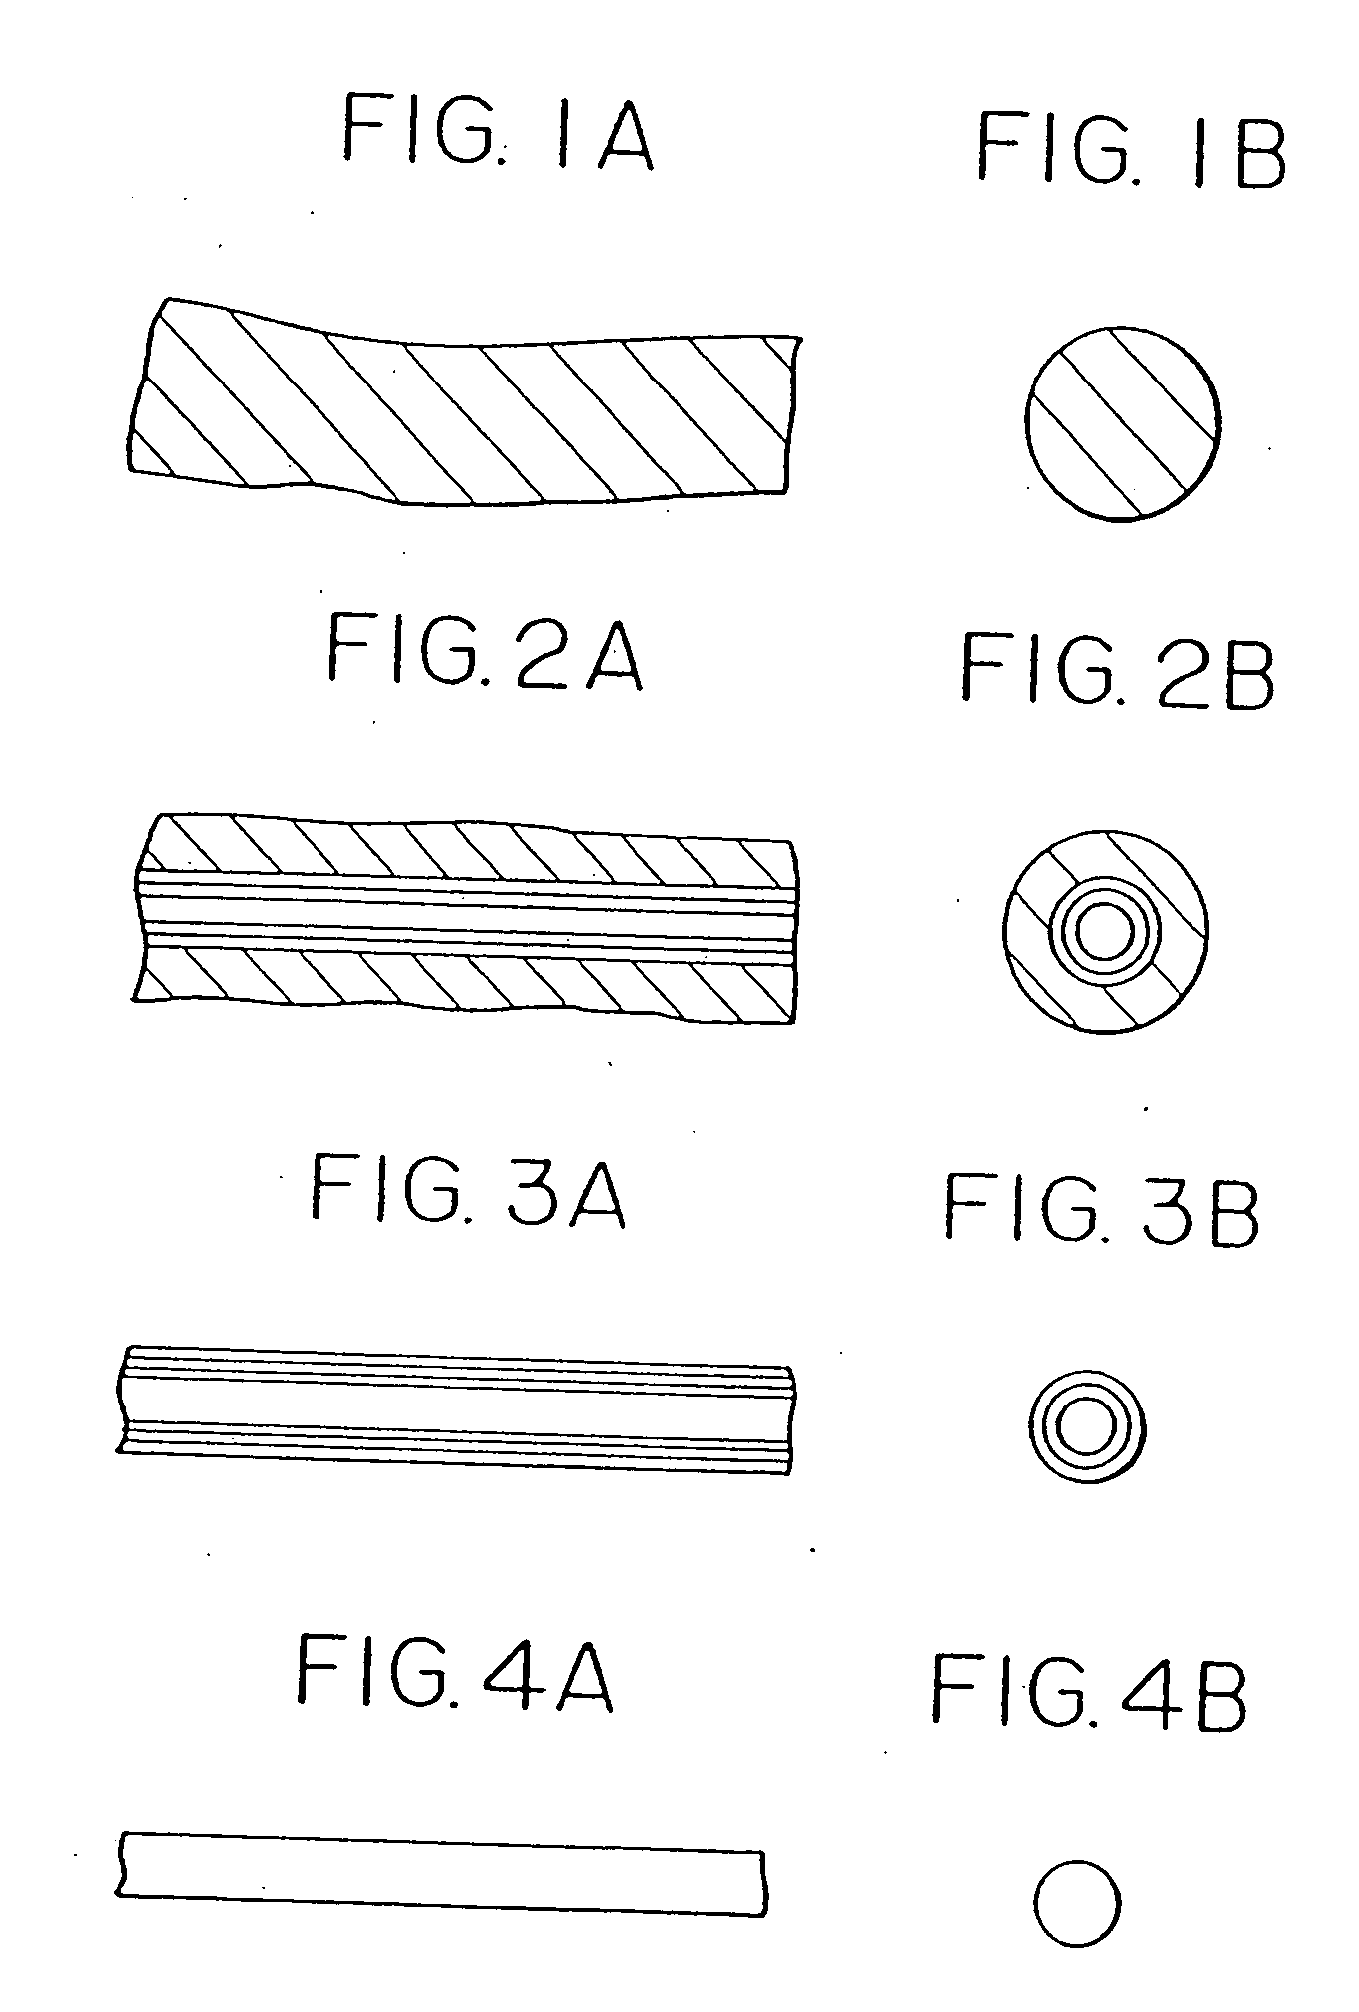 Electronic device containing a carbon nanotube